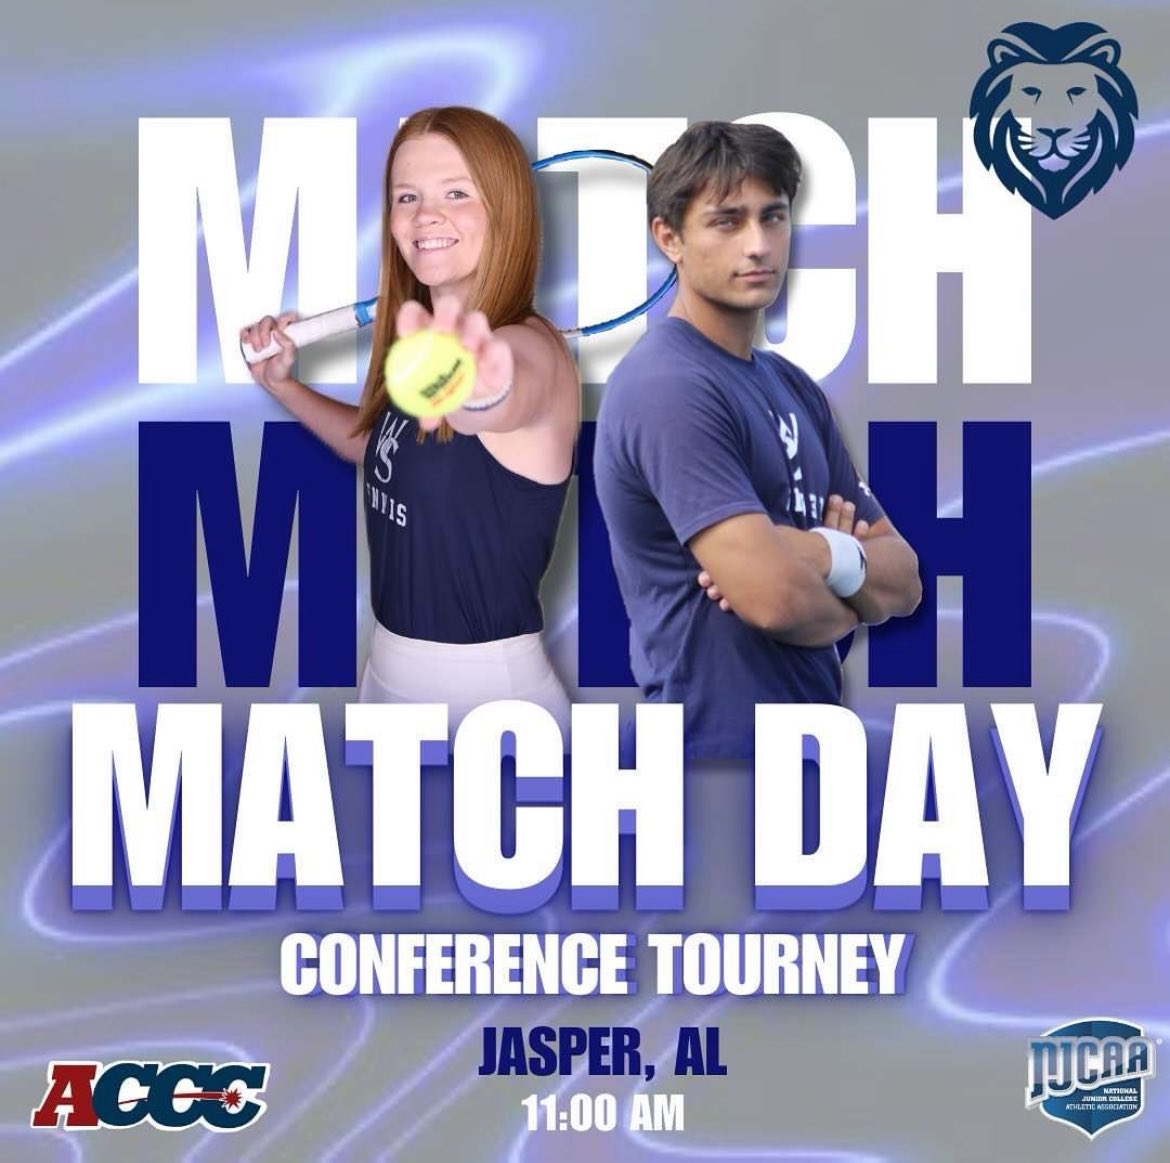 The tennis conference tourney begins at 11 AM in Jasper today! Good luck, Lions!